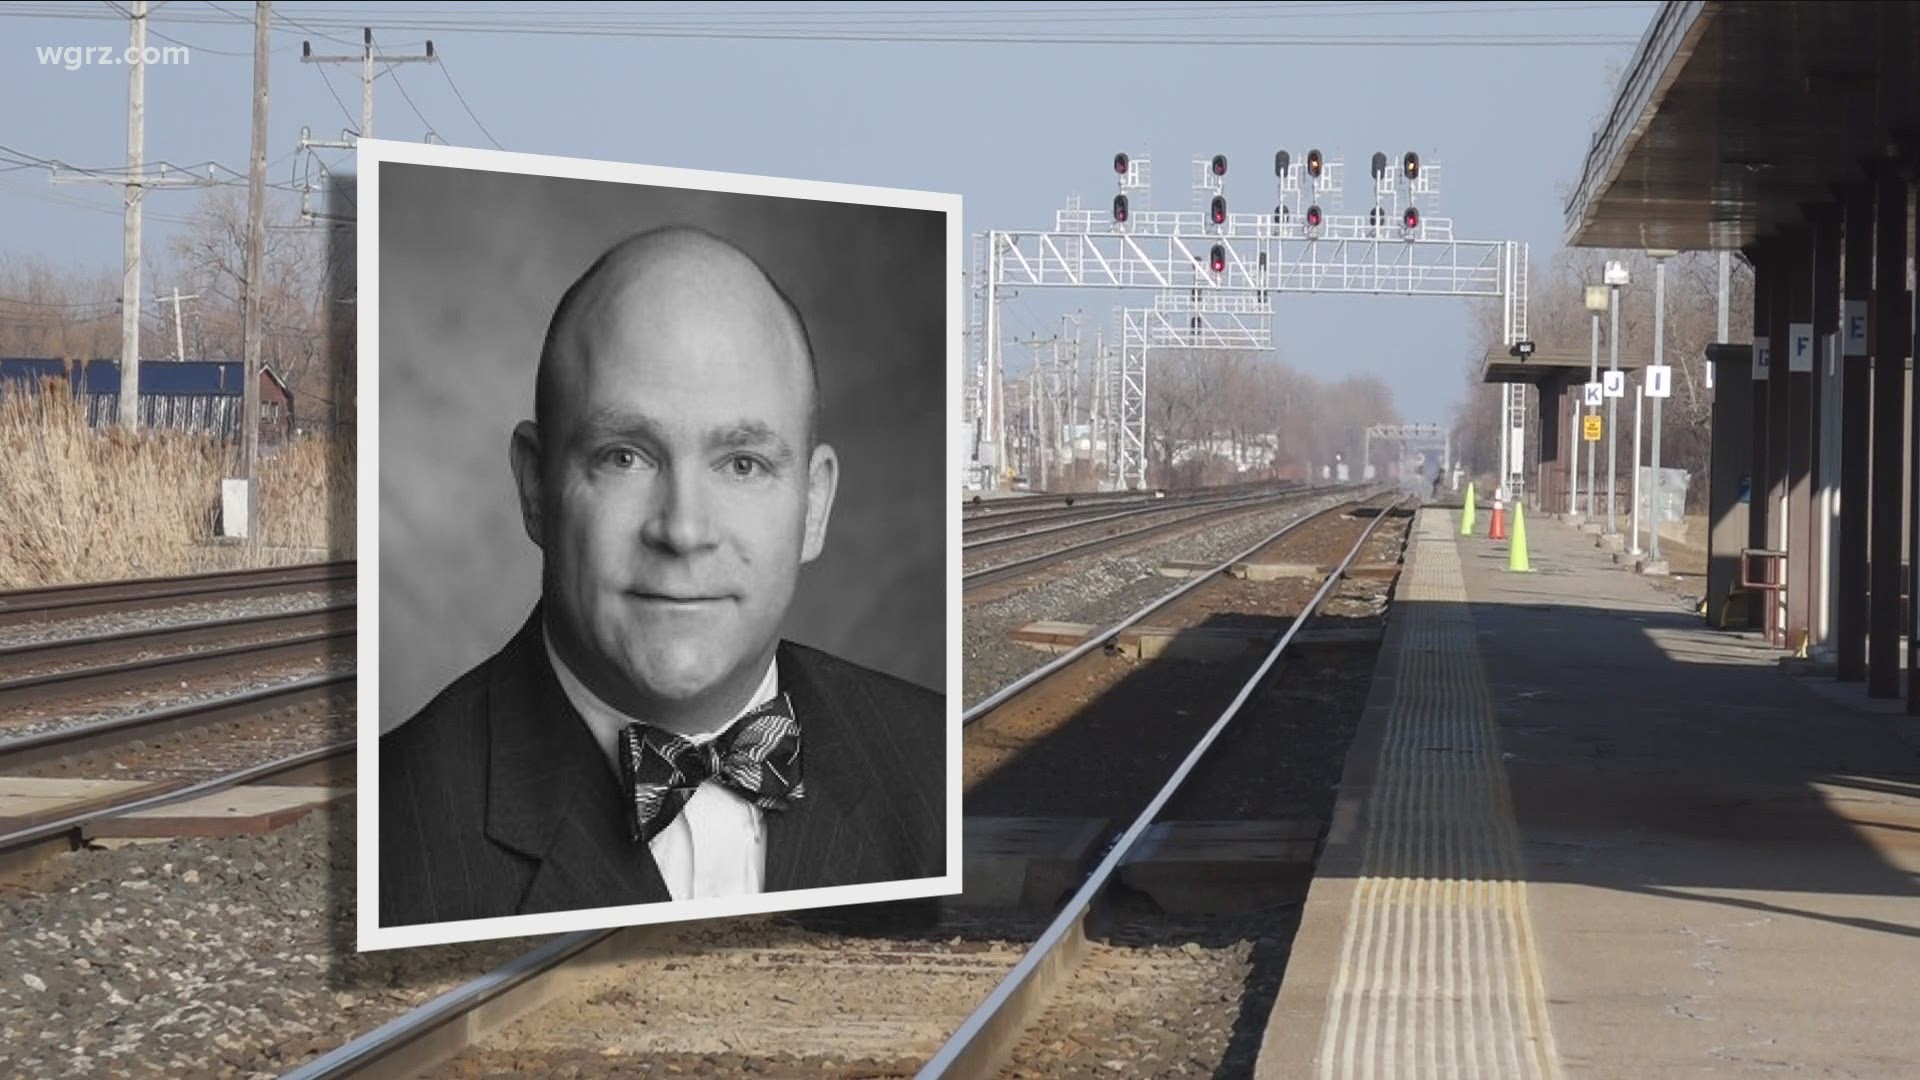 February 28th is that State Supreme Court Judge John Michalski was struck and injured by a train